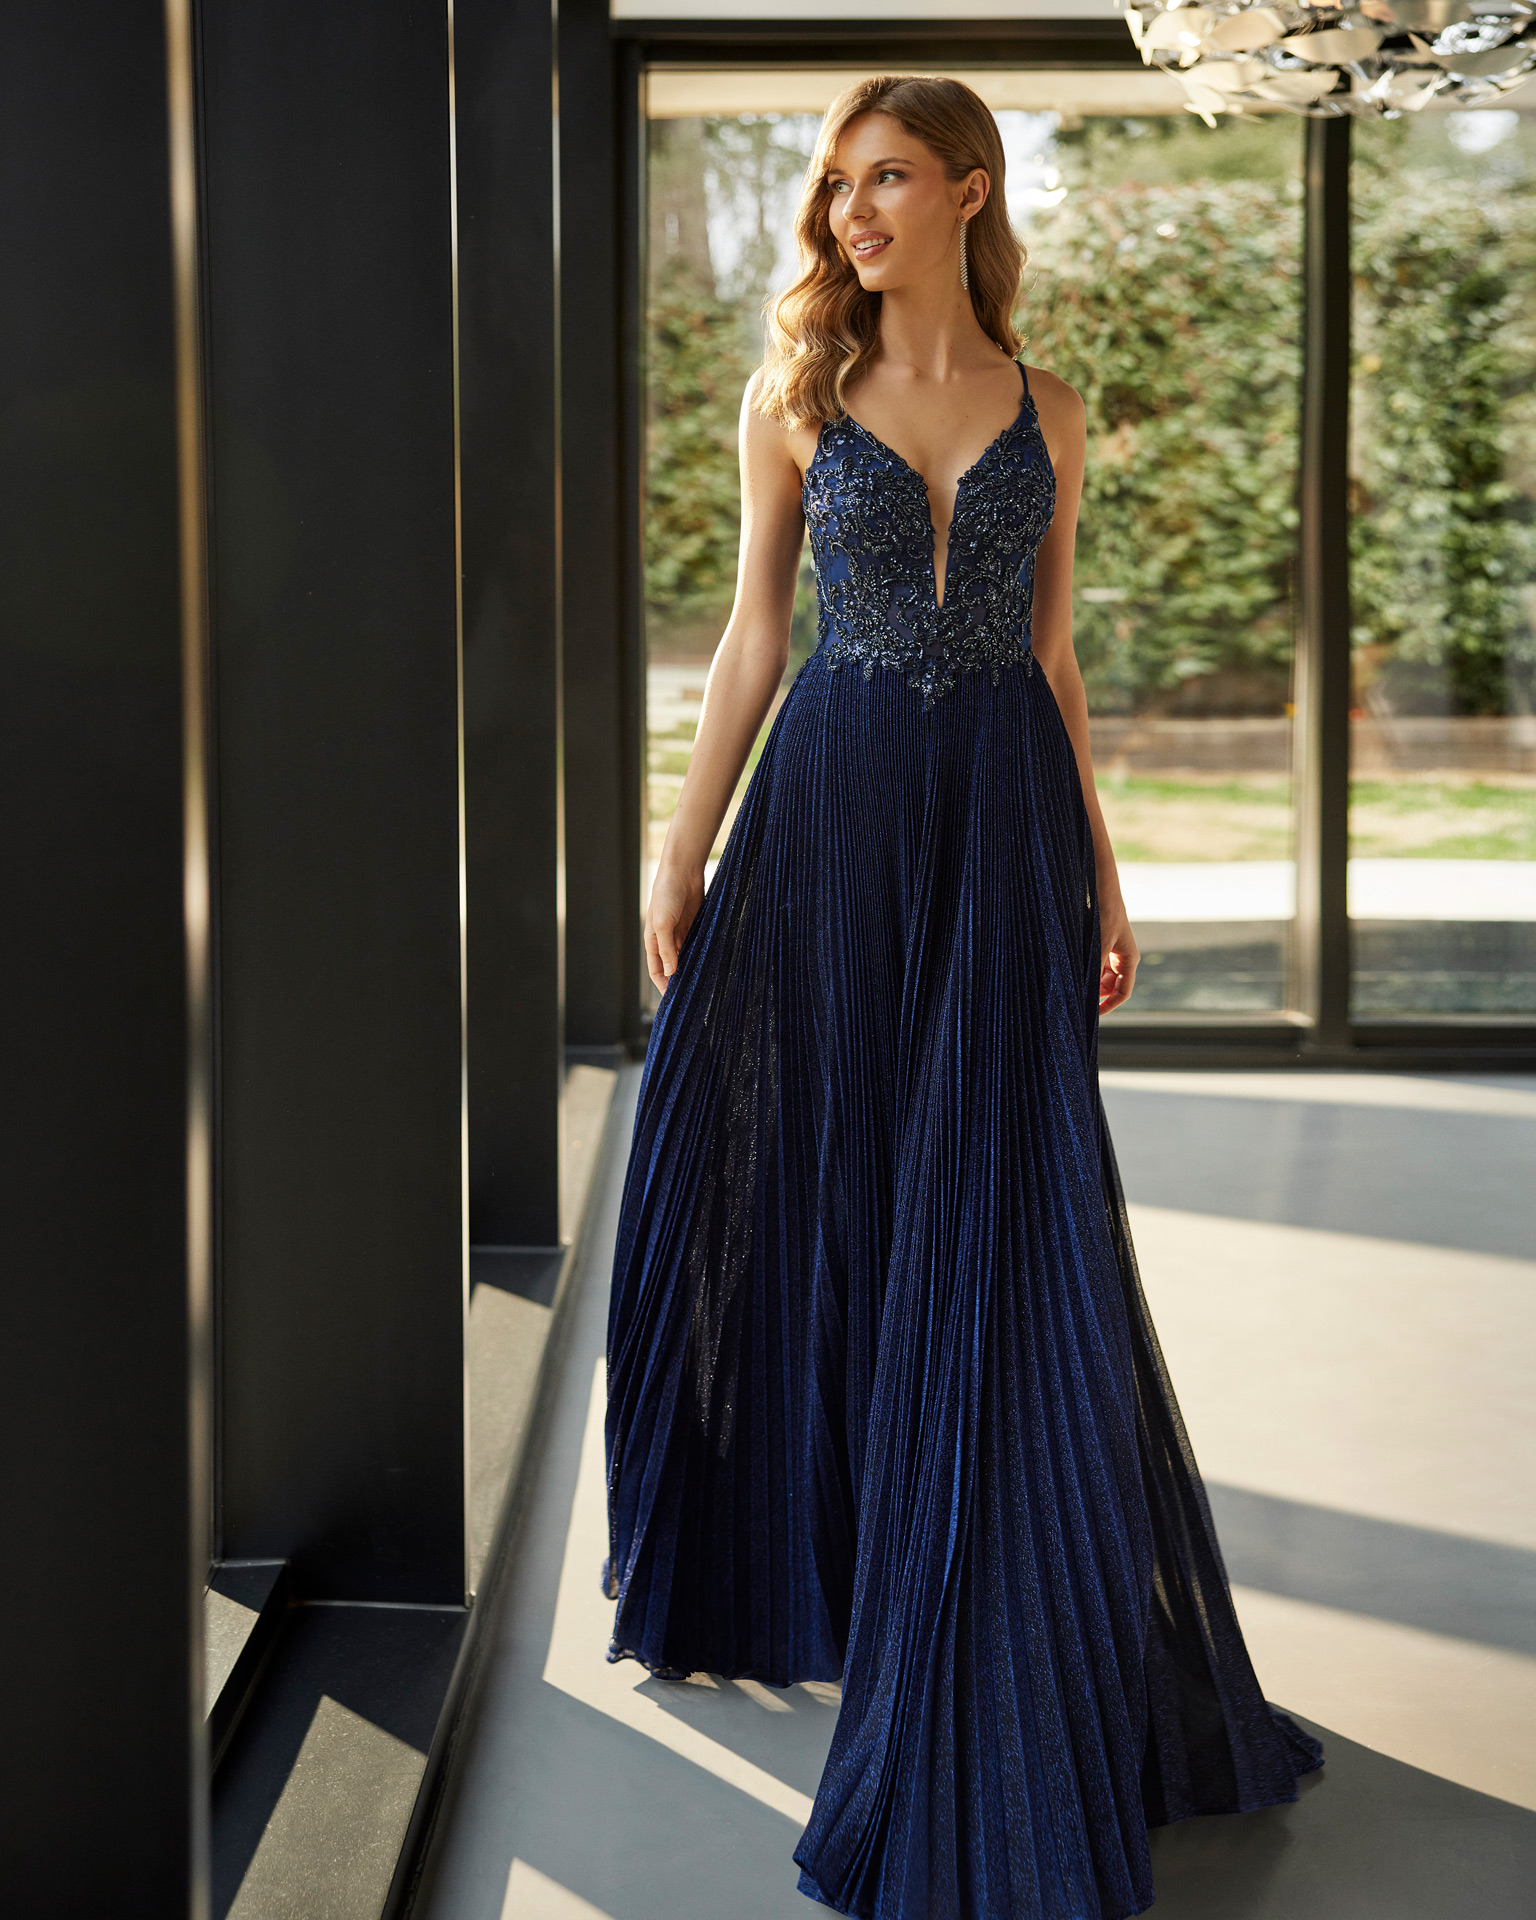 Sexy long evening dress. Crafted with lurex and beadwork lace. With a V-neckline and open back with straps. Marfil Barcelona design for parties and celebrations. MARFIL_BARCELONA.